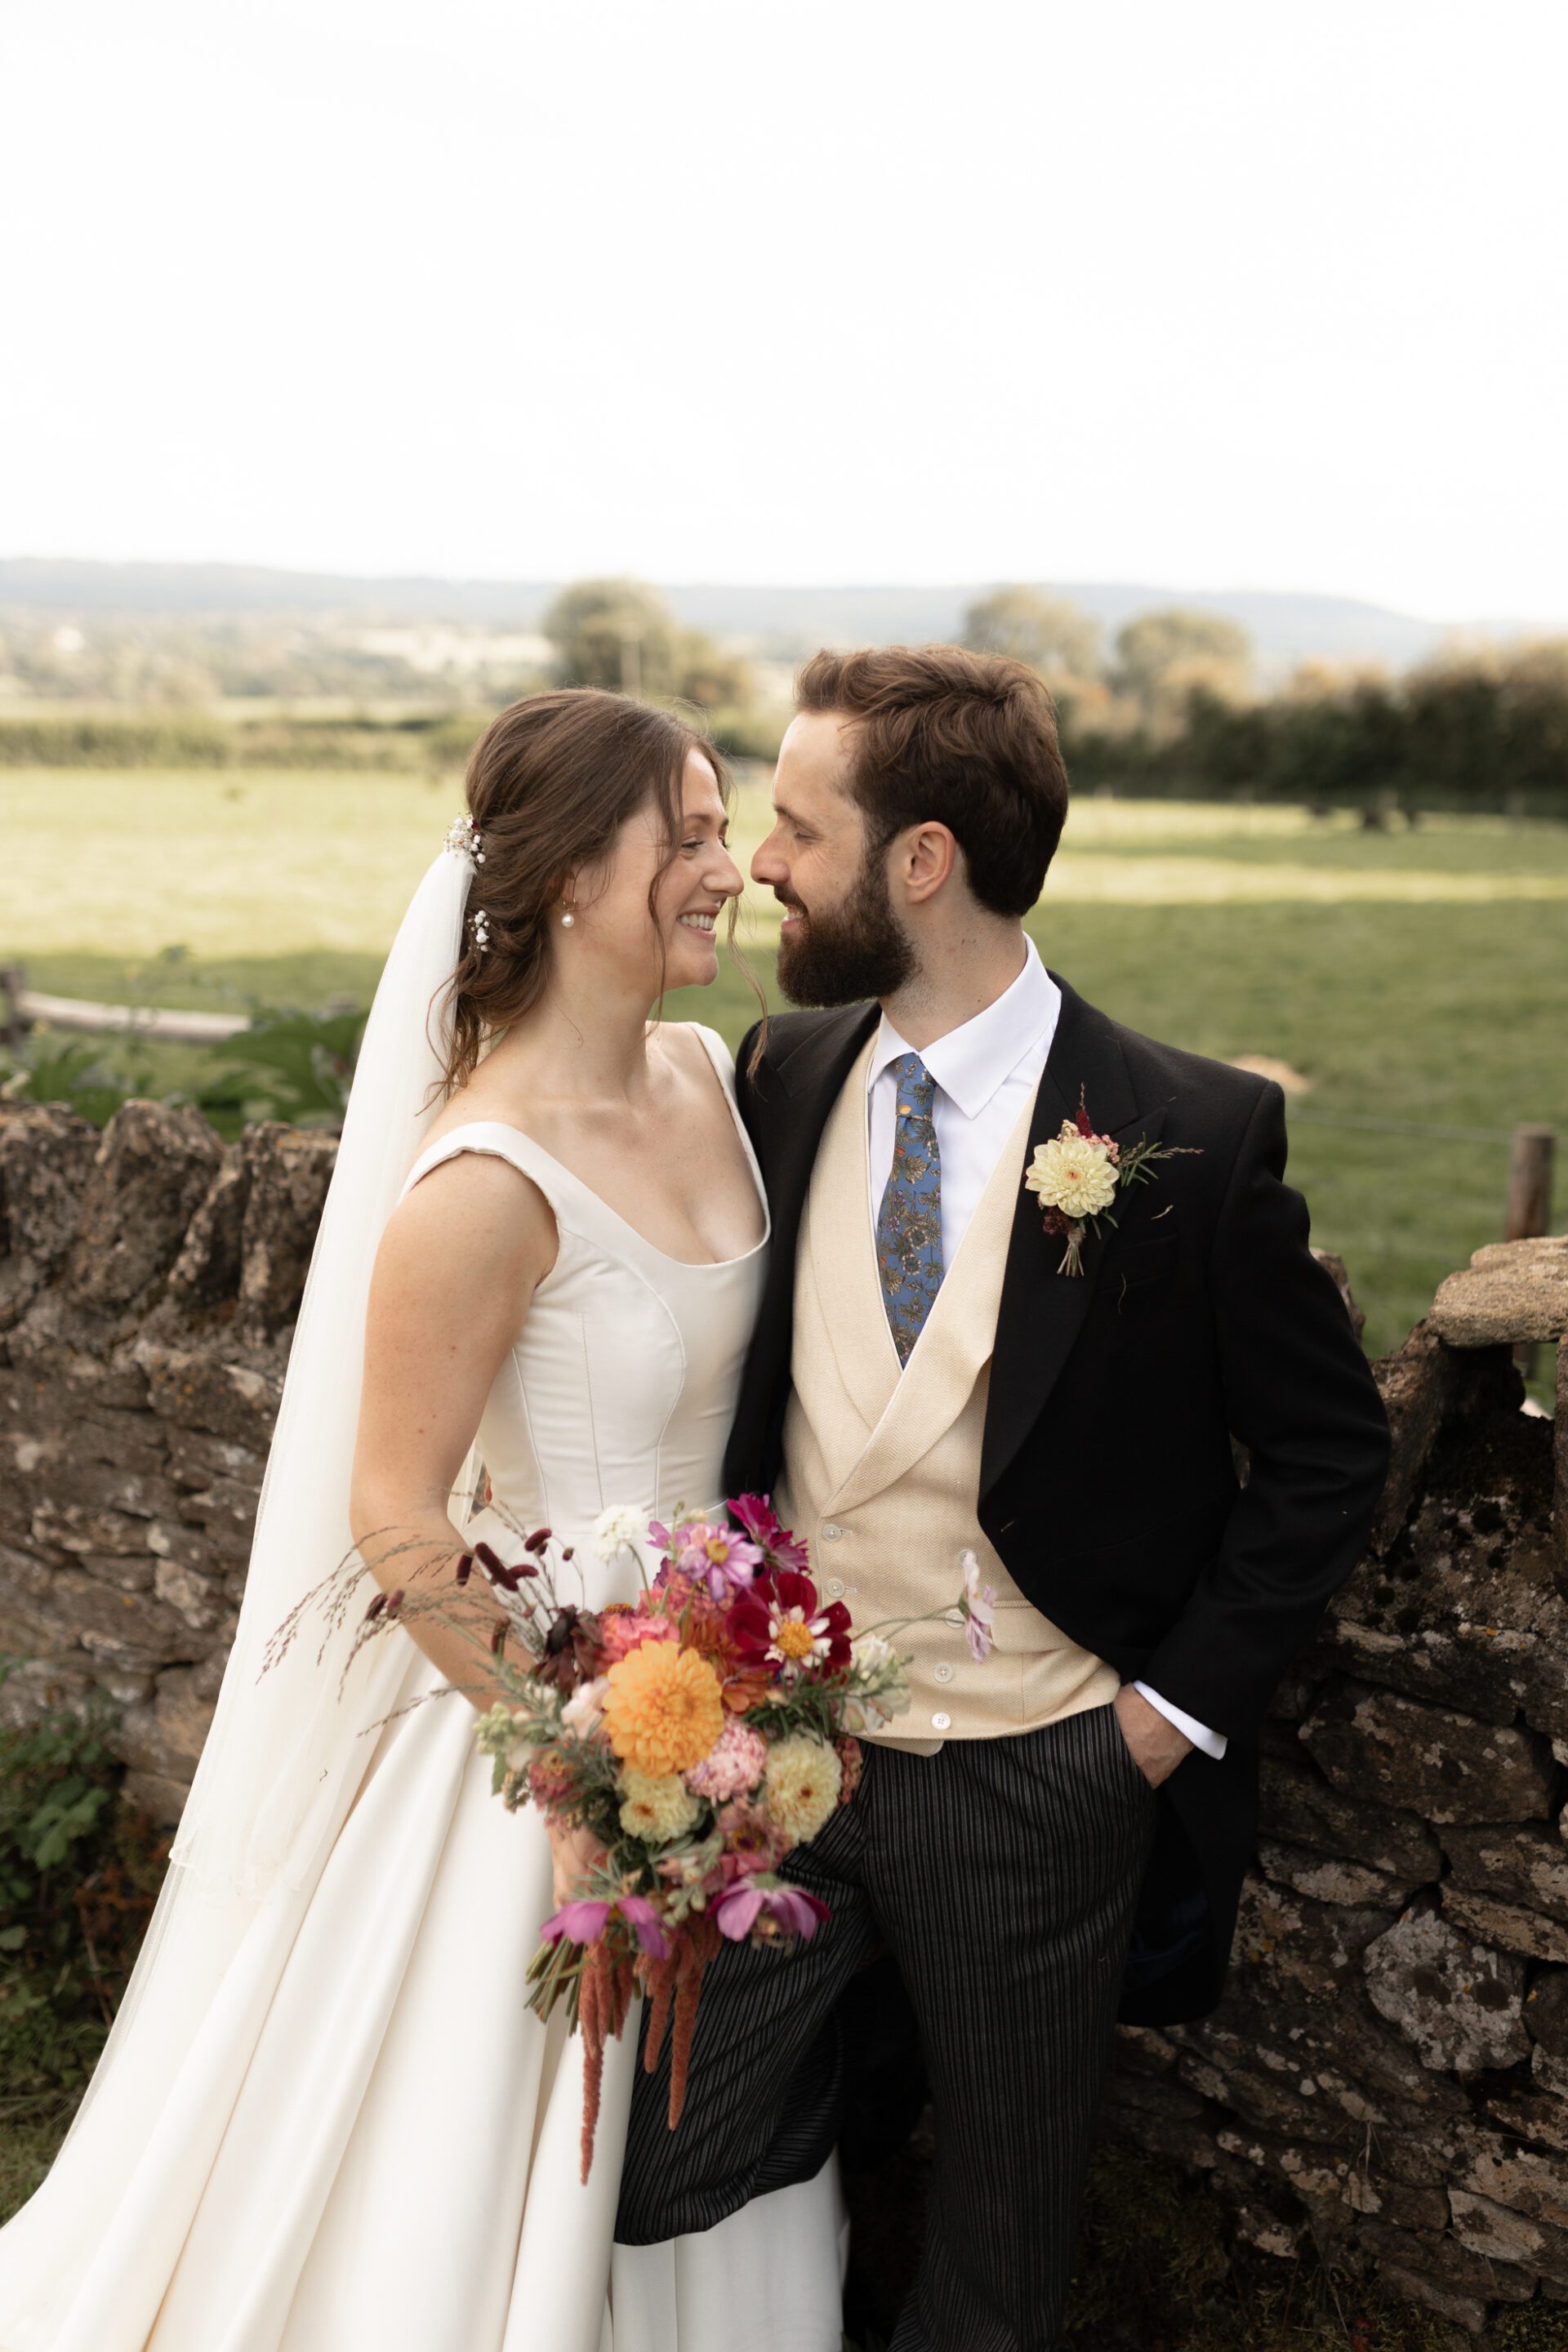 Couples portrait session at Somerset marquee wedding